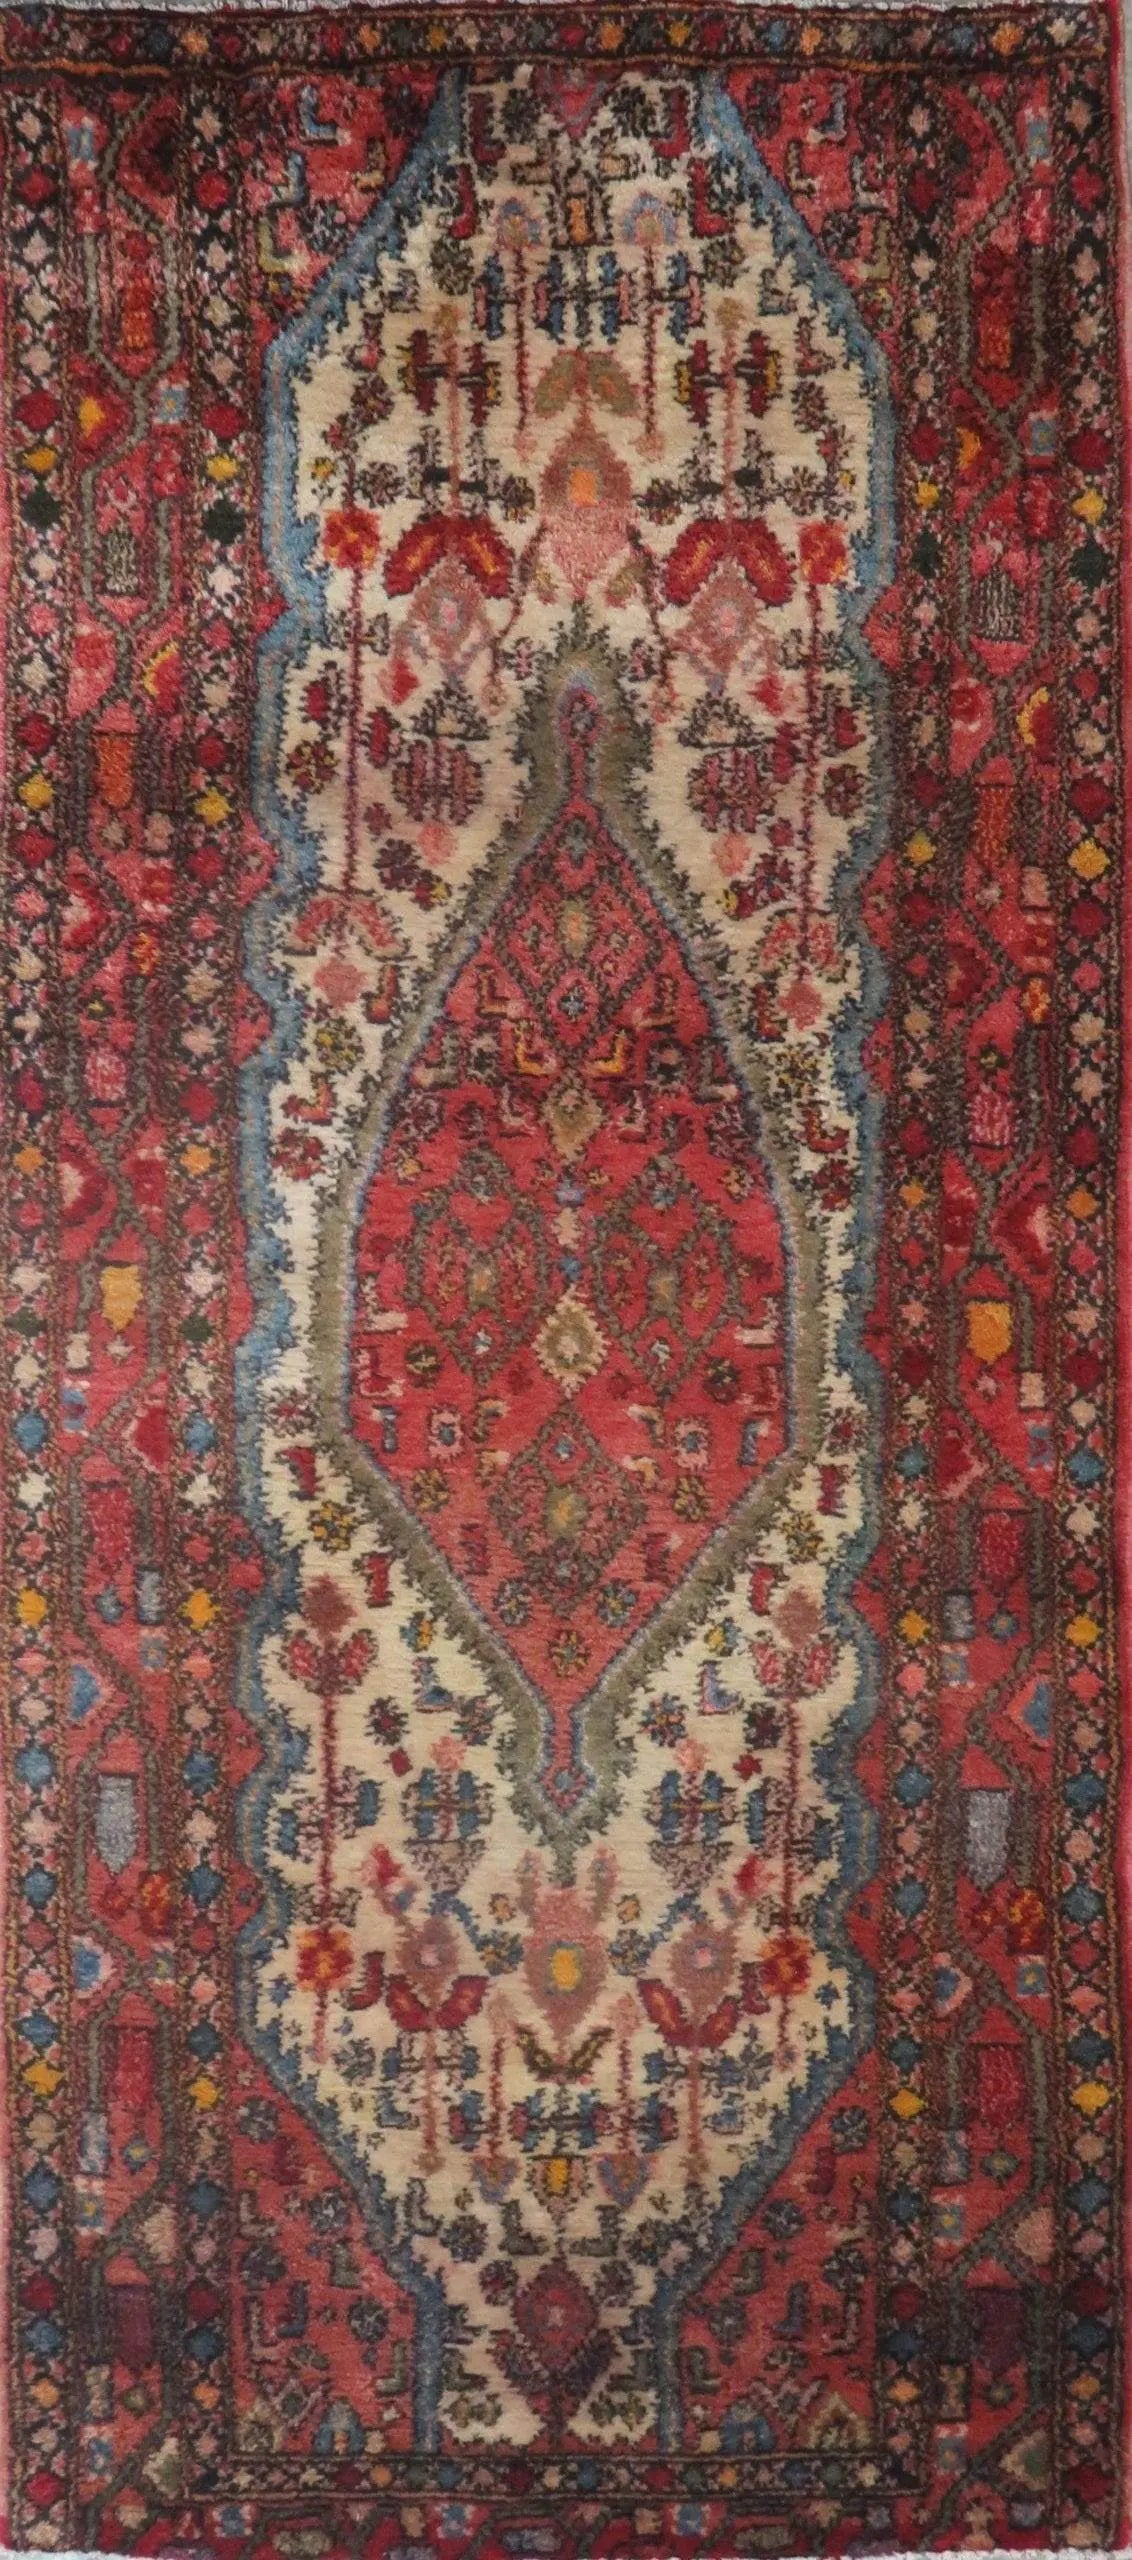 Hand-Knotted Persian Wool Rug _ Luxurious Vintage Design, 7'7" x 3'3", Artisan Crafted